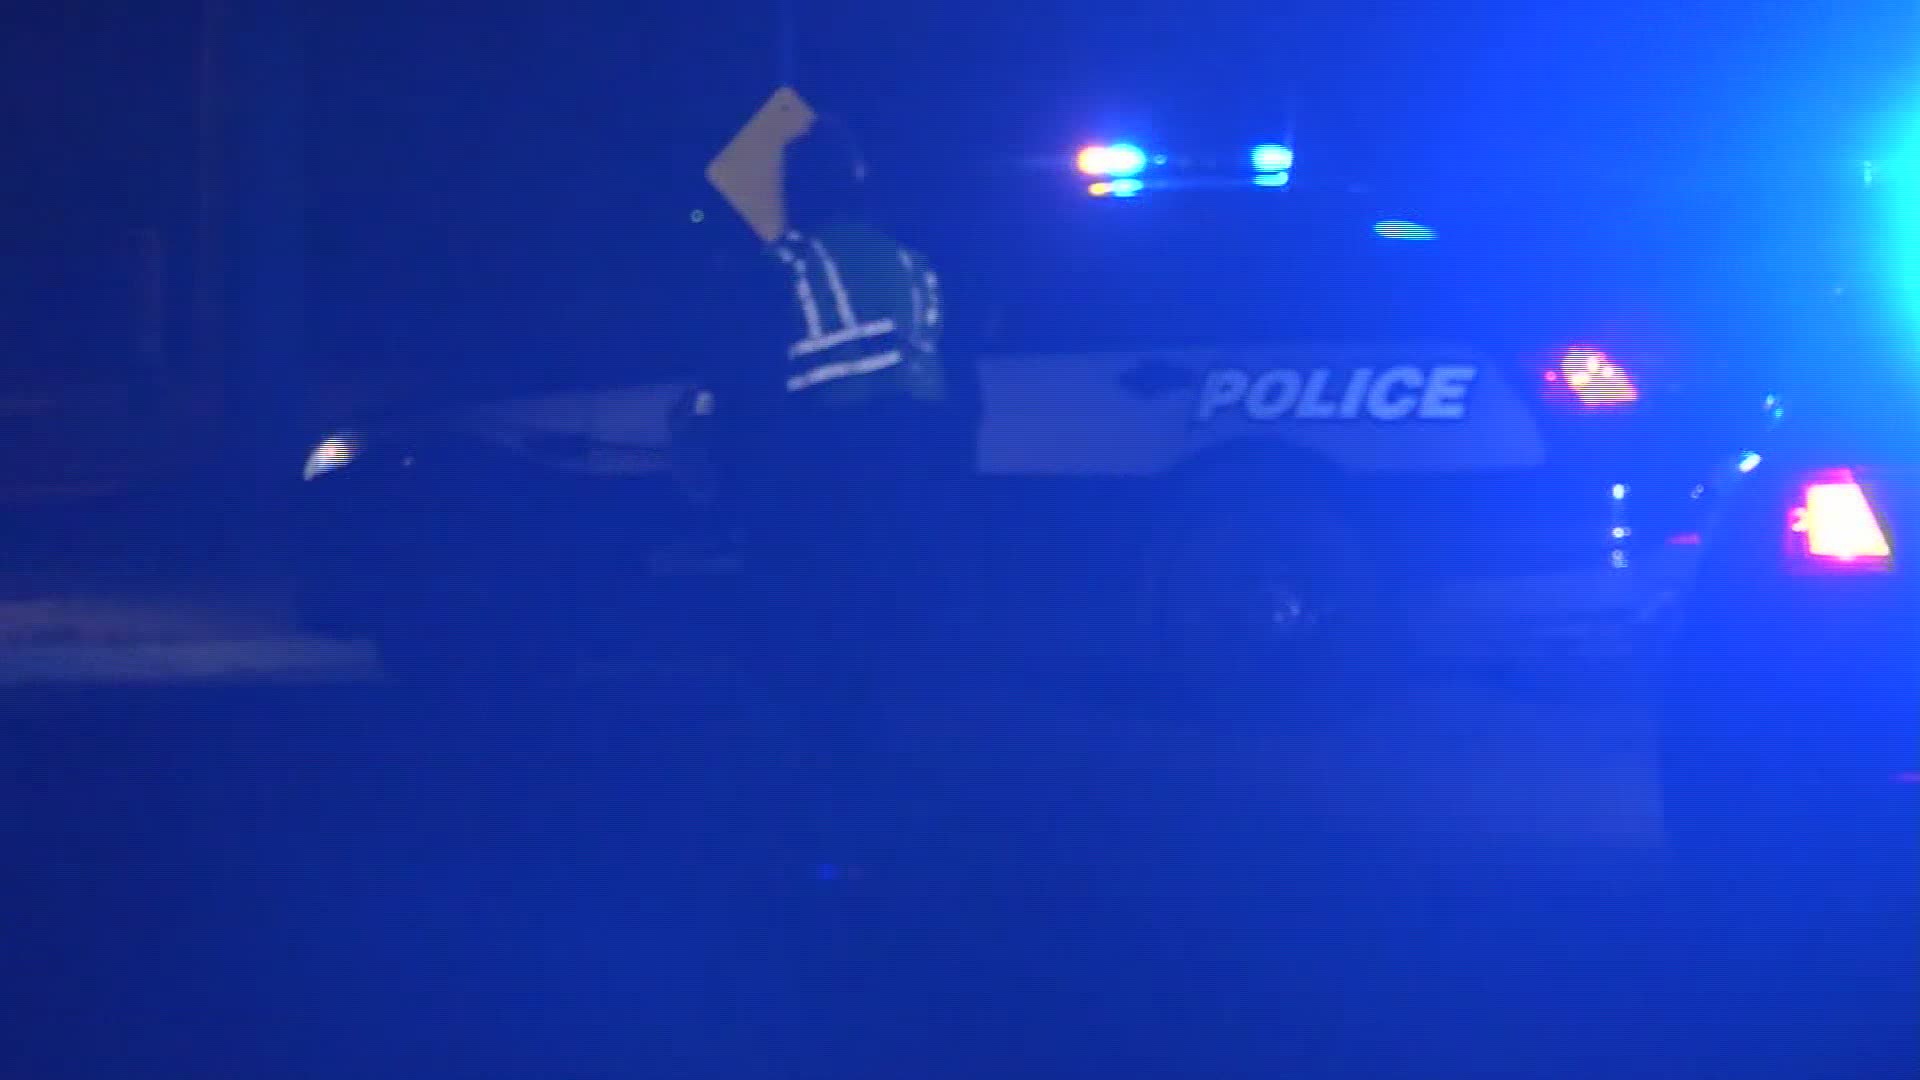 Investigators say a Greensboro police officer has died after being involved in a car crash, while attempting to locate a suspect as part of robbery investigation. Greensboro police say two officers were transported to a local hospital where one died. The second officer is being treated for non life threatening injuries.